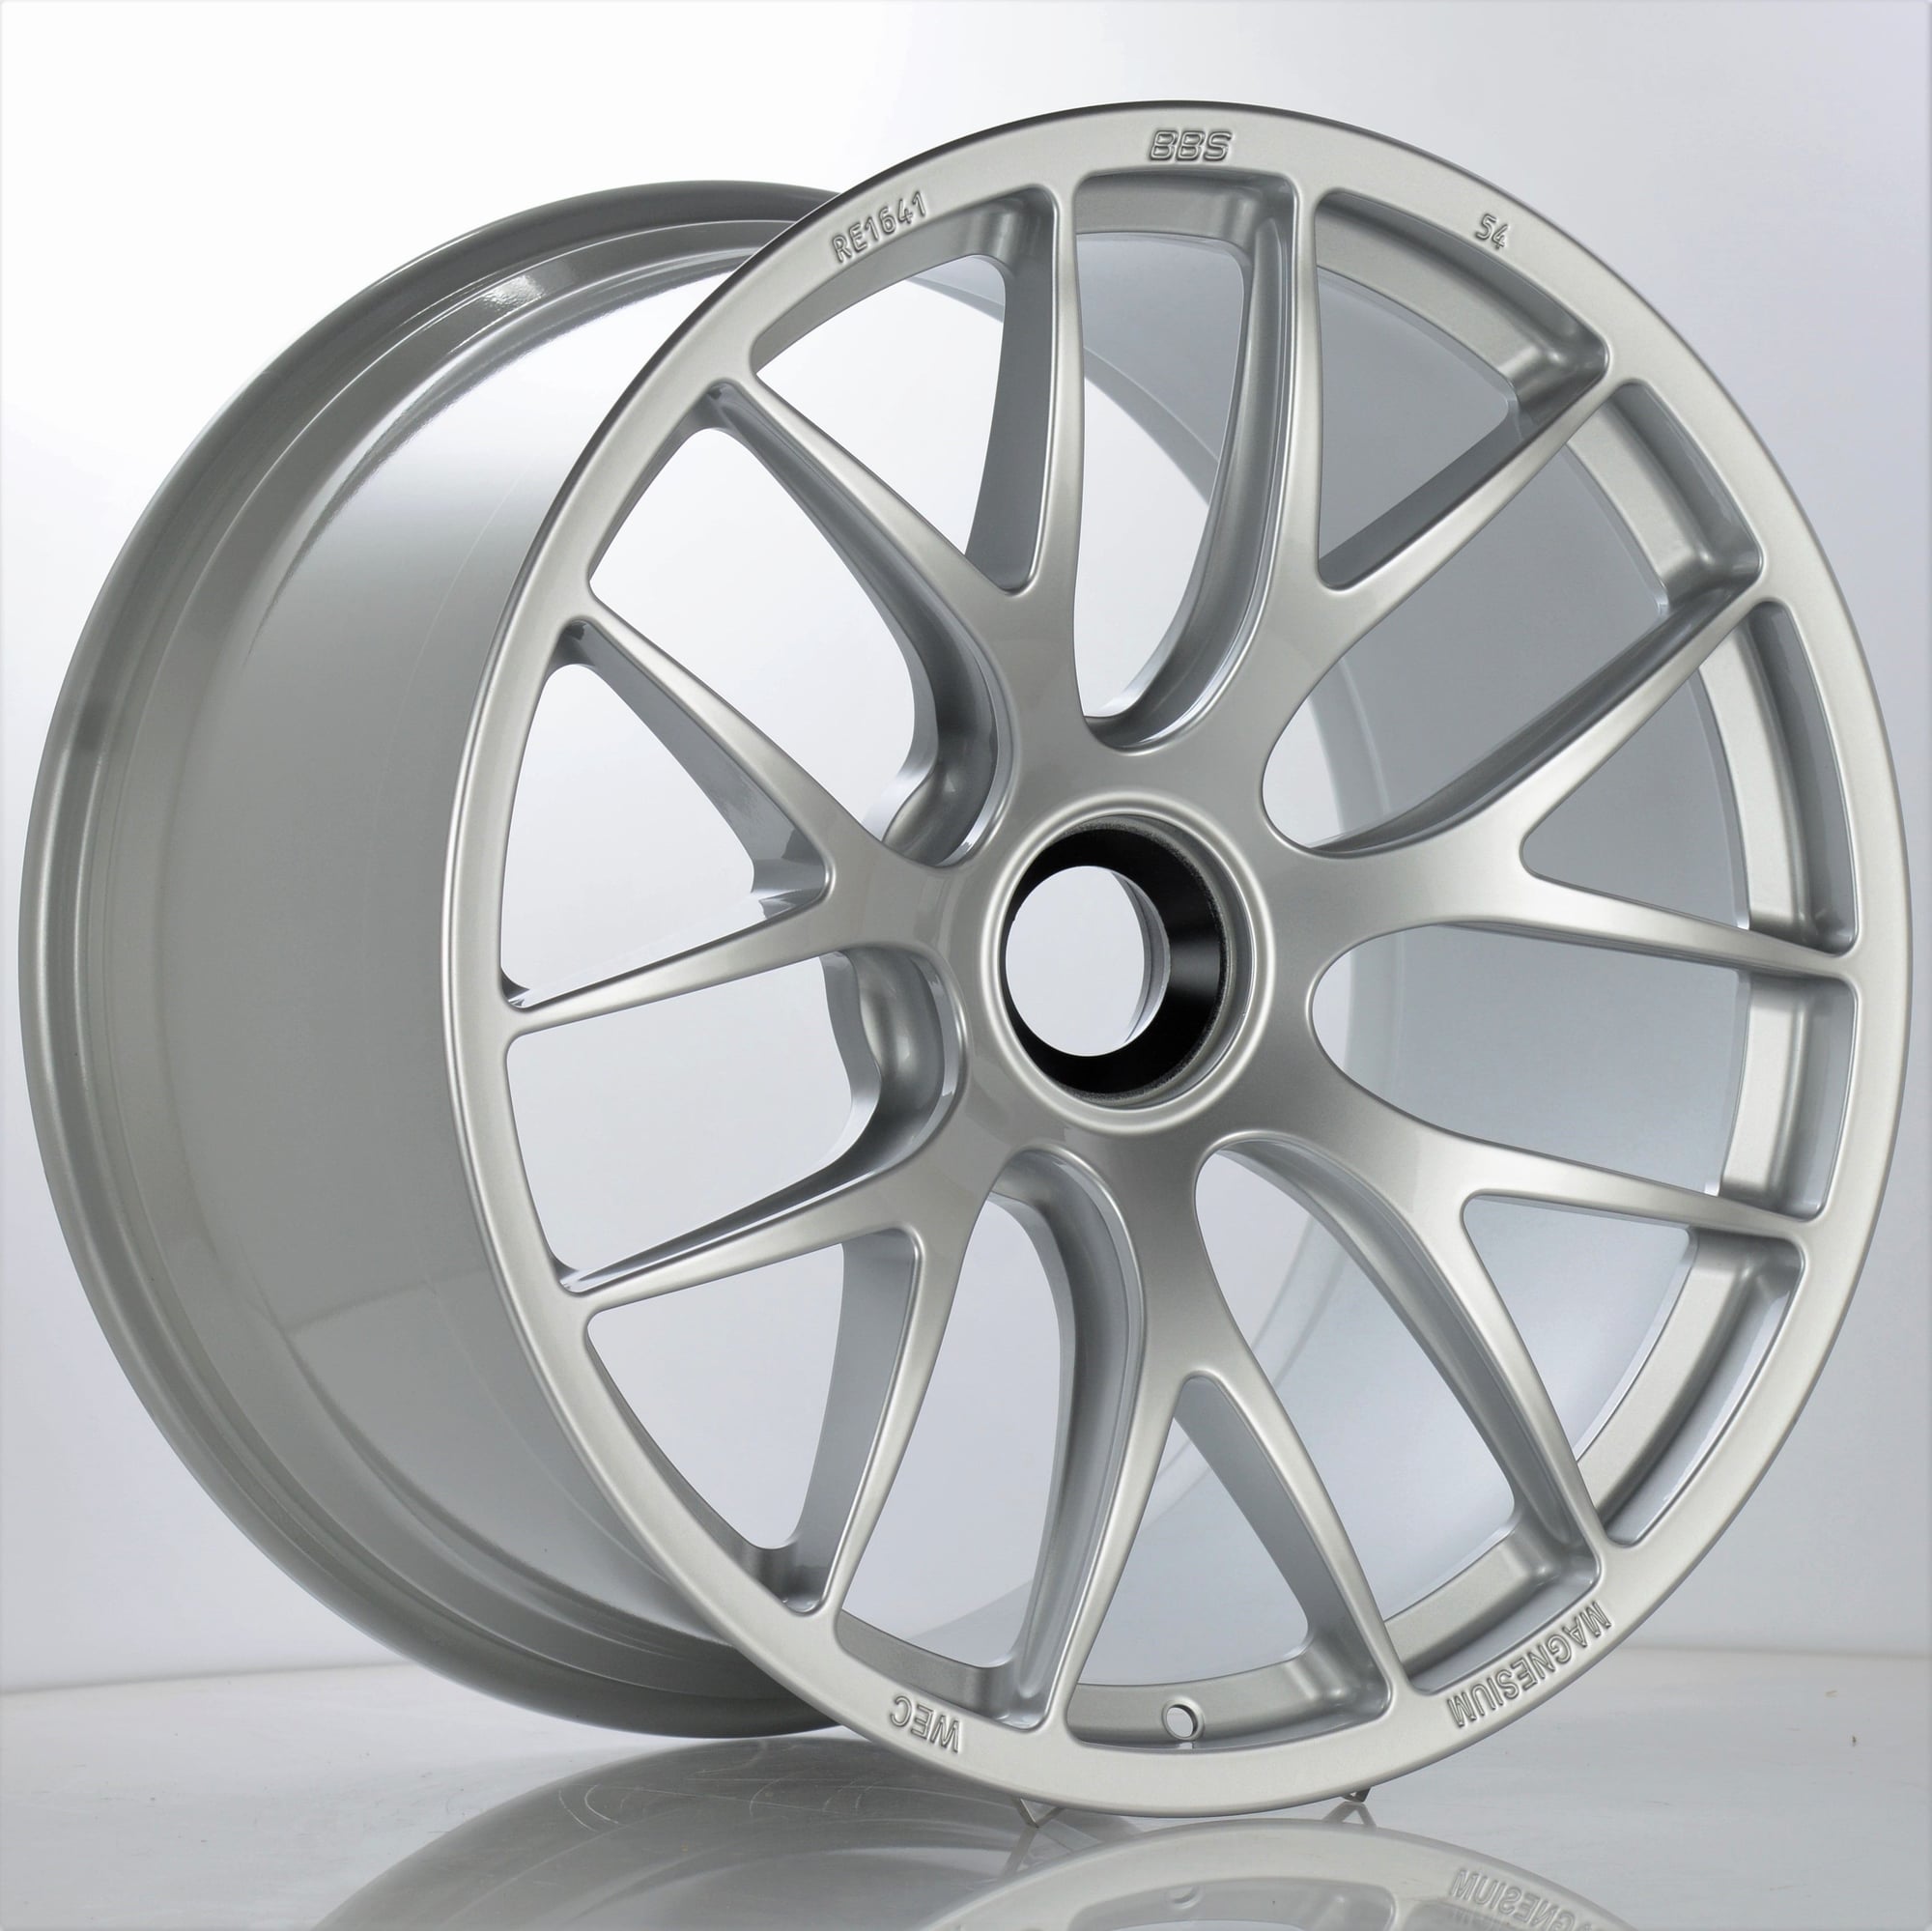 Wheels and Tires/Axles - BBS Motorsport / Manthey Racing Magnesium wheels 20/21 for GT2RS & GT3RS - New - 2016 to 2019 Porsche 911 - Fullerton, CA 92831, United States